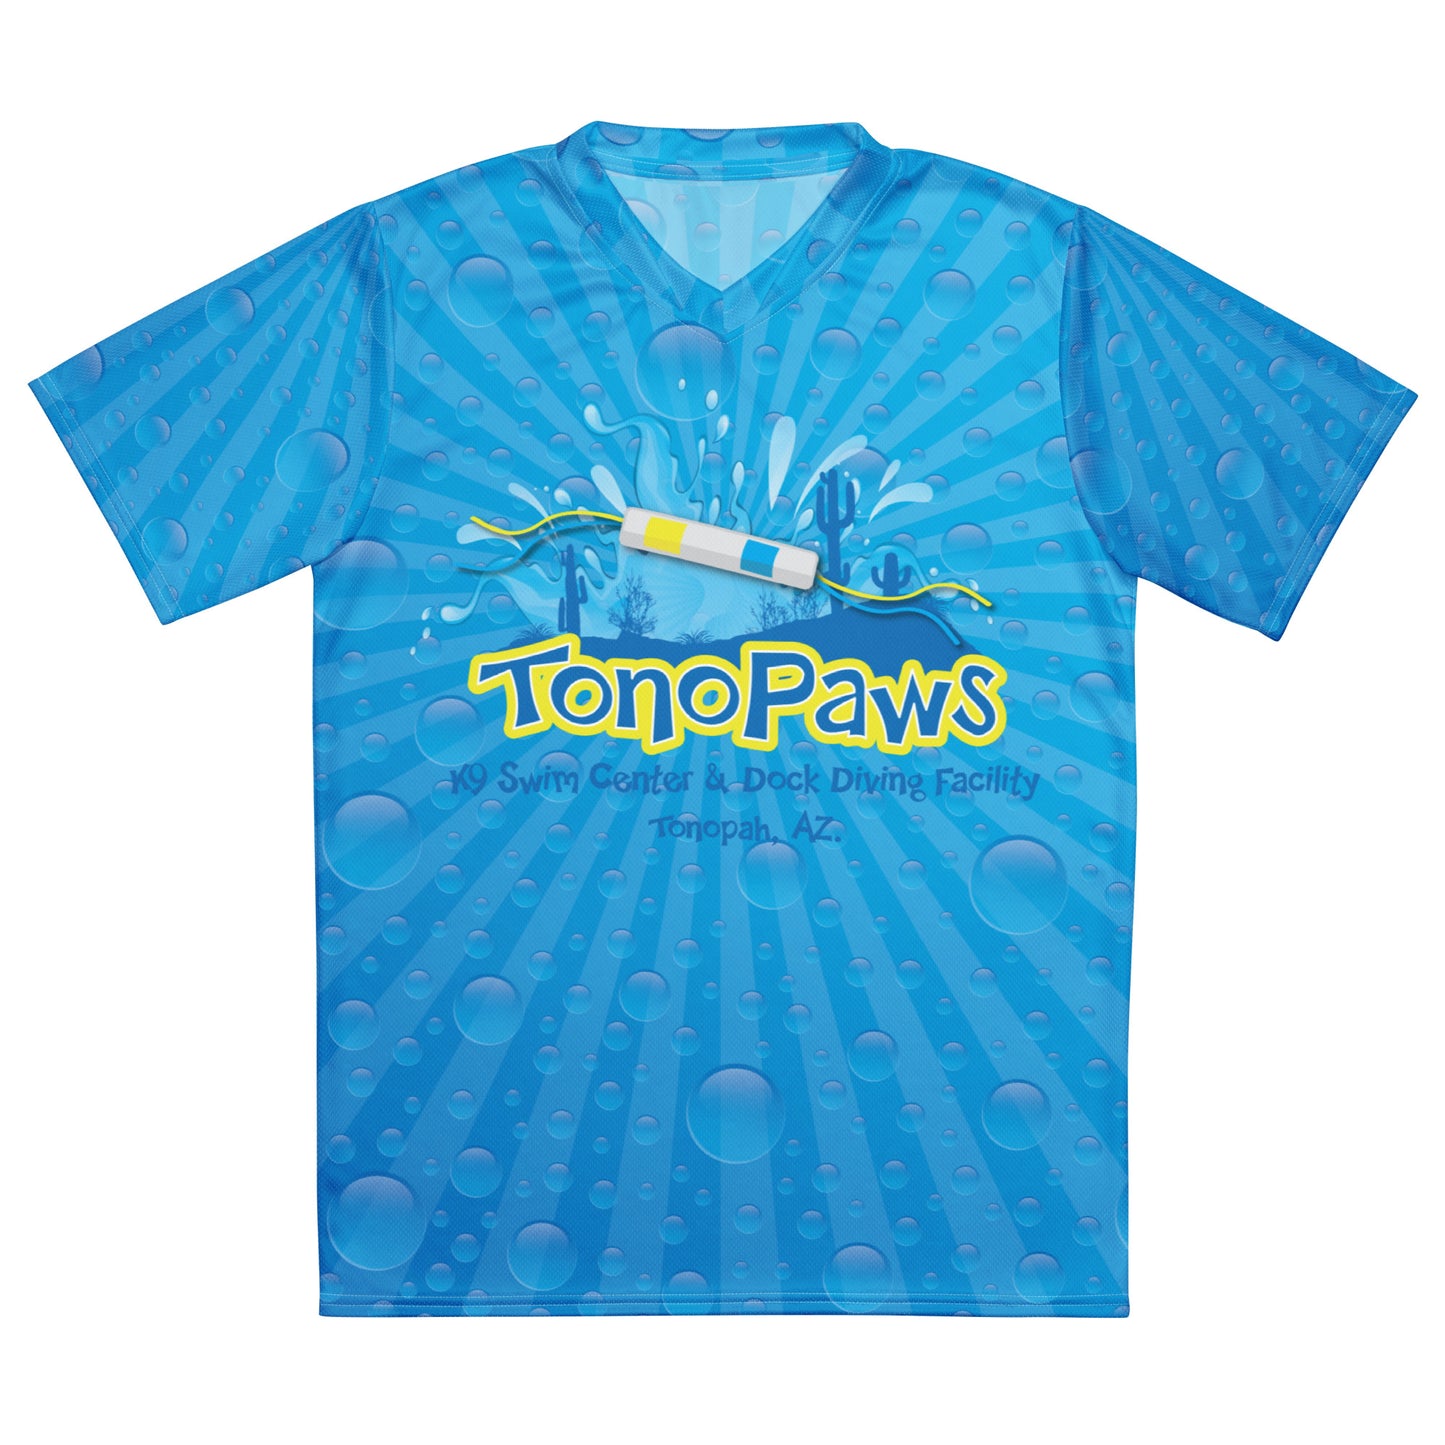 TONOPAWS Recycled unisex sports jersey